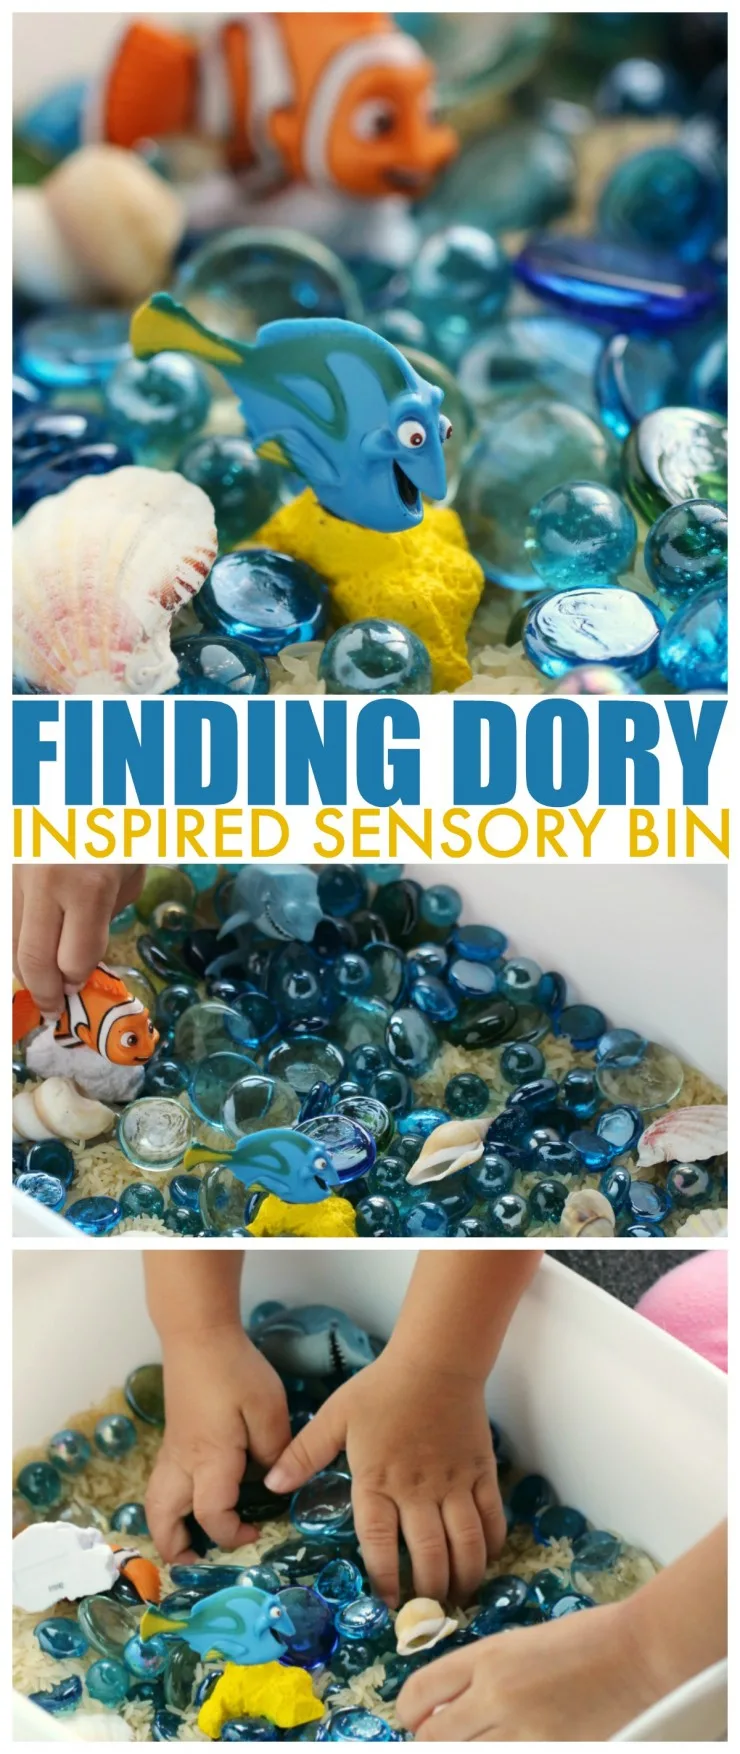 This Finding Dory Inspired Sensory Bin is the perfect kids activity for engaging little Finding Nemo fans this summer. Let your kids explore the ocean habitat with a little imaginative play.